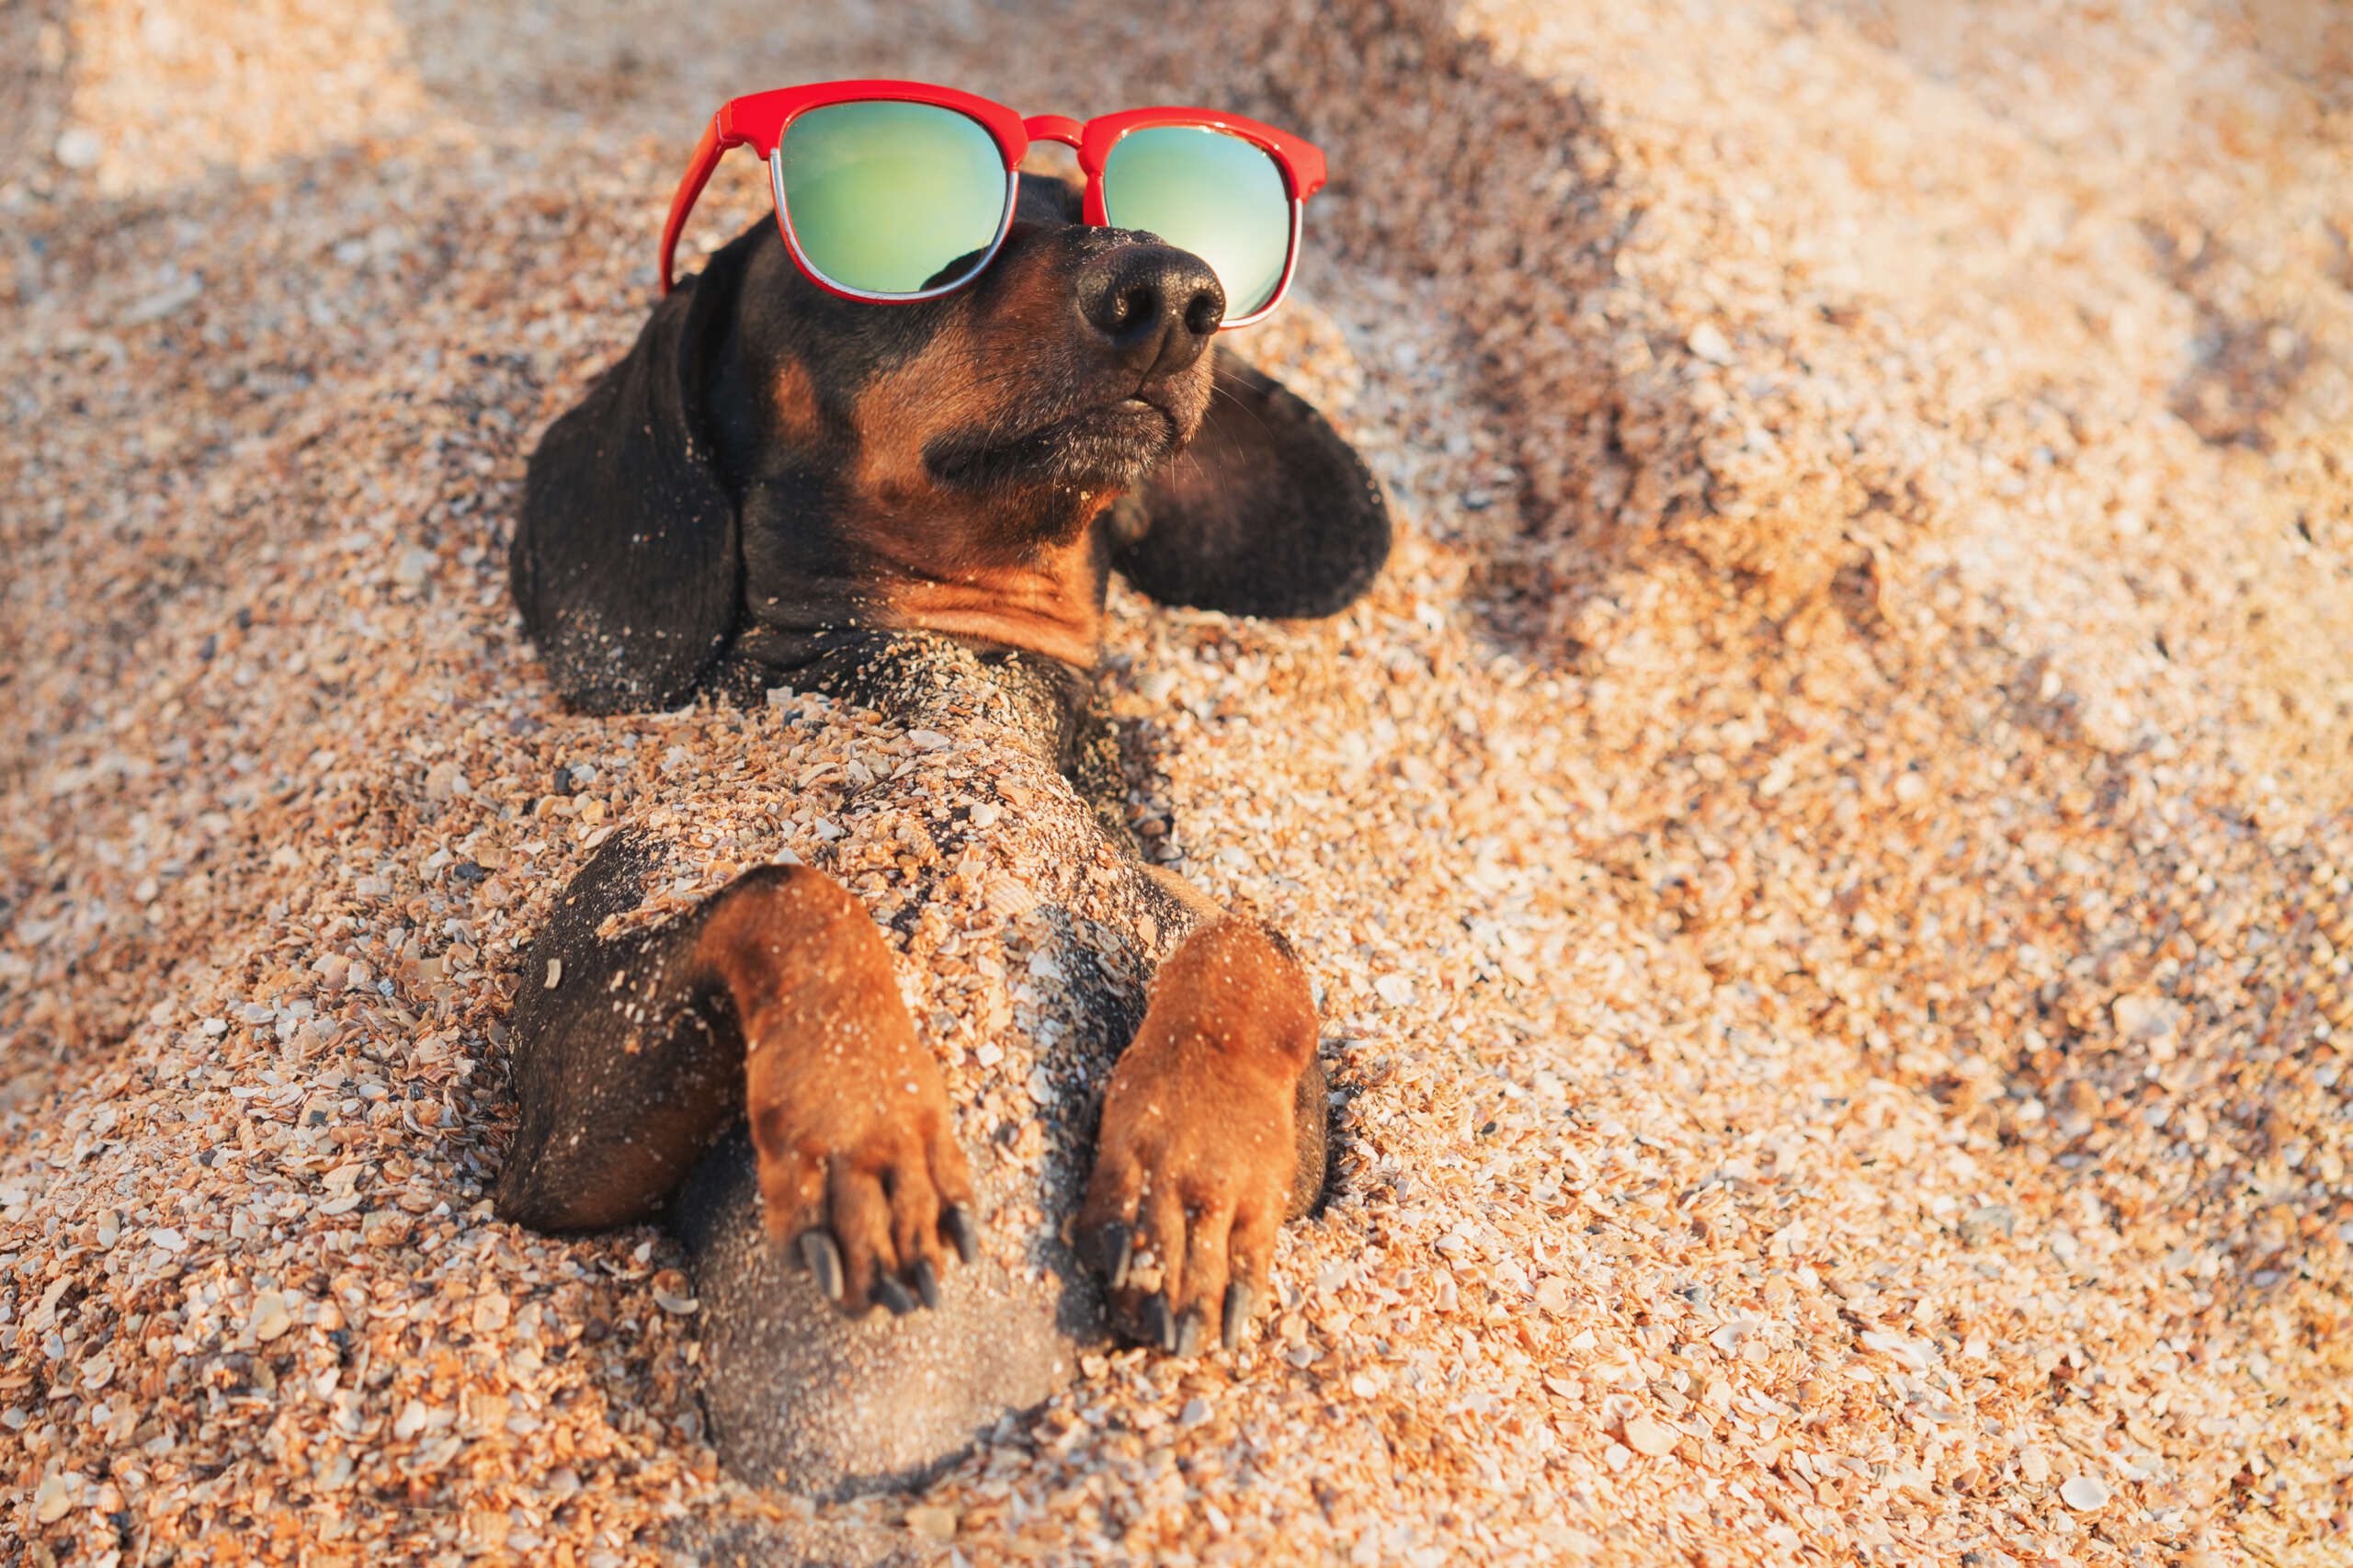 Cute,Dog,Of,Dachshund,,Black,And,Tan,,Wearing,Red,Sunglasses,